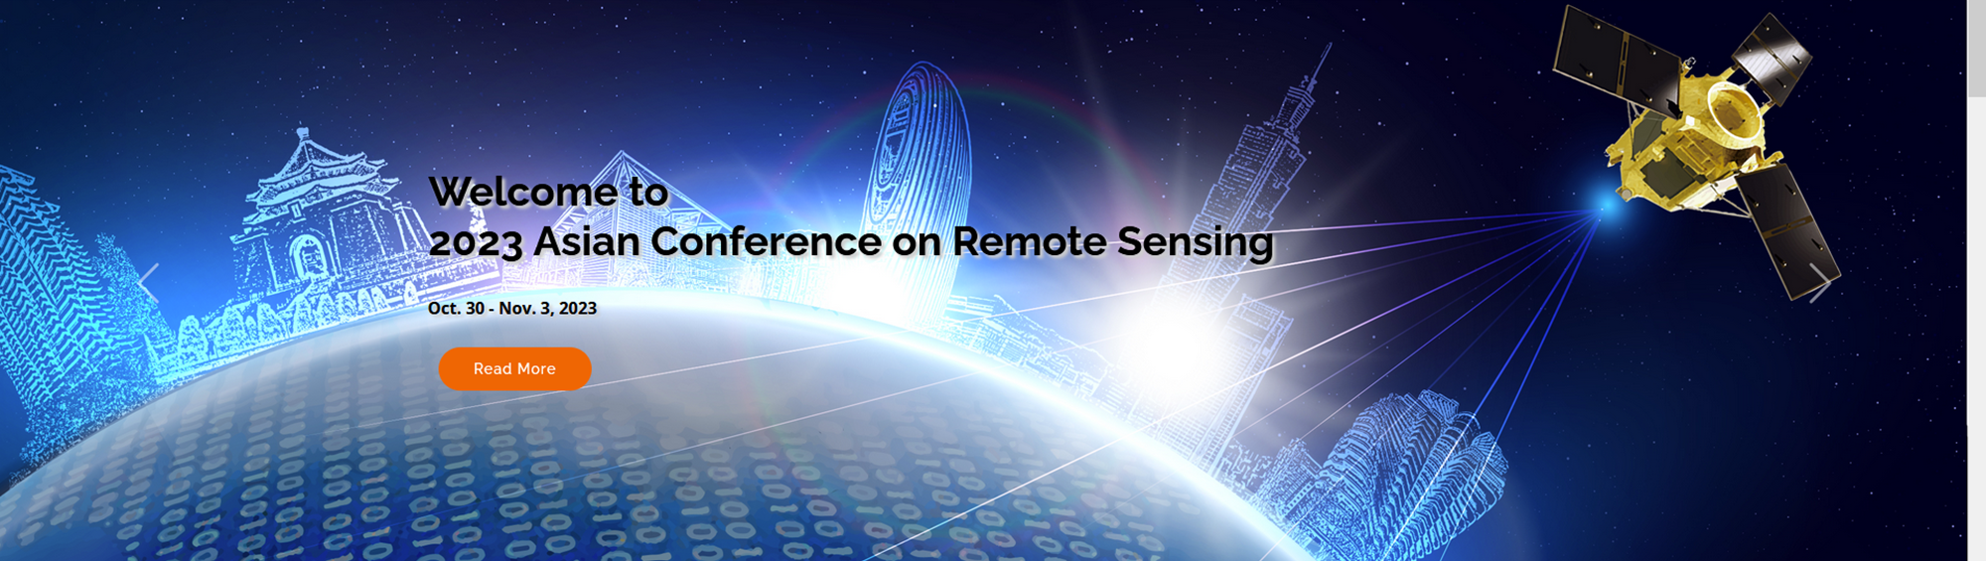 Asian Conference on Remote Sensing (ACRS)